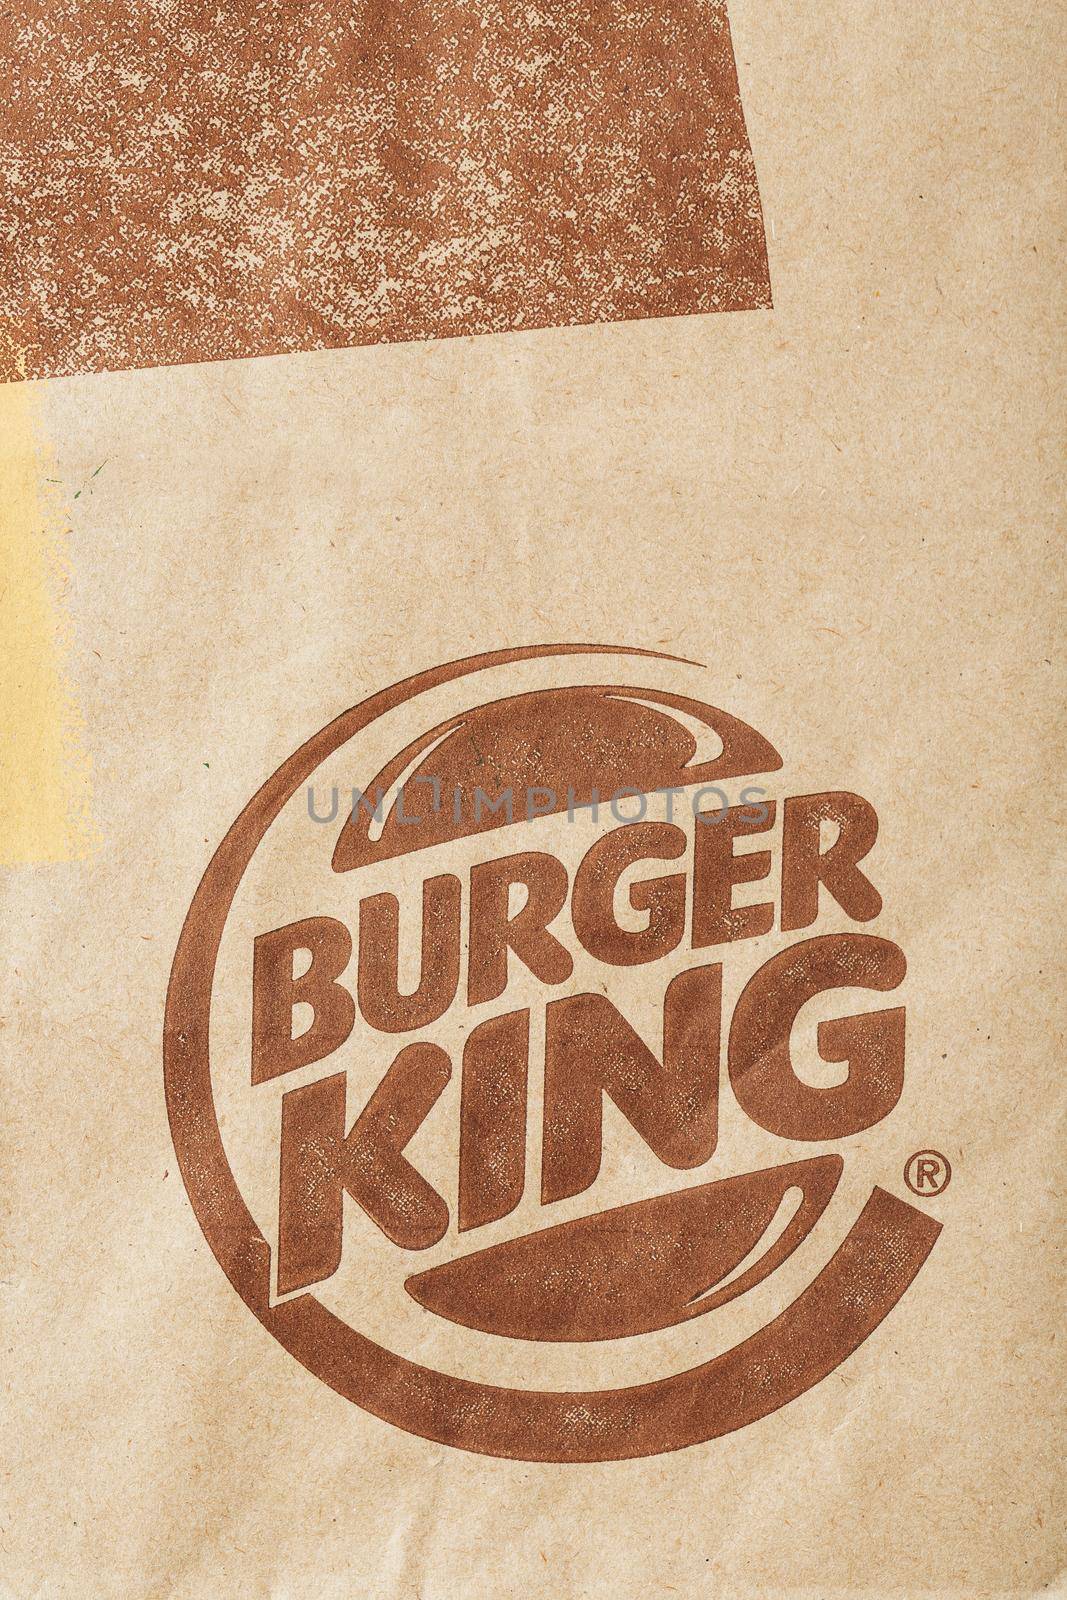 Russia, Moscow - May 17, 2021: Paper bag with Burger King logo. Burger King is a global fast food hamburger chain with headquarters worldwide by AlexGrec